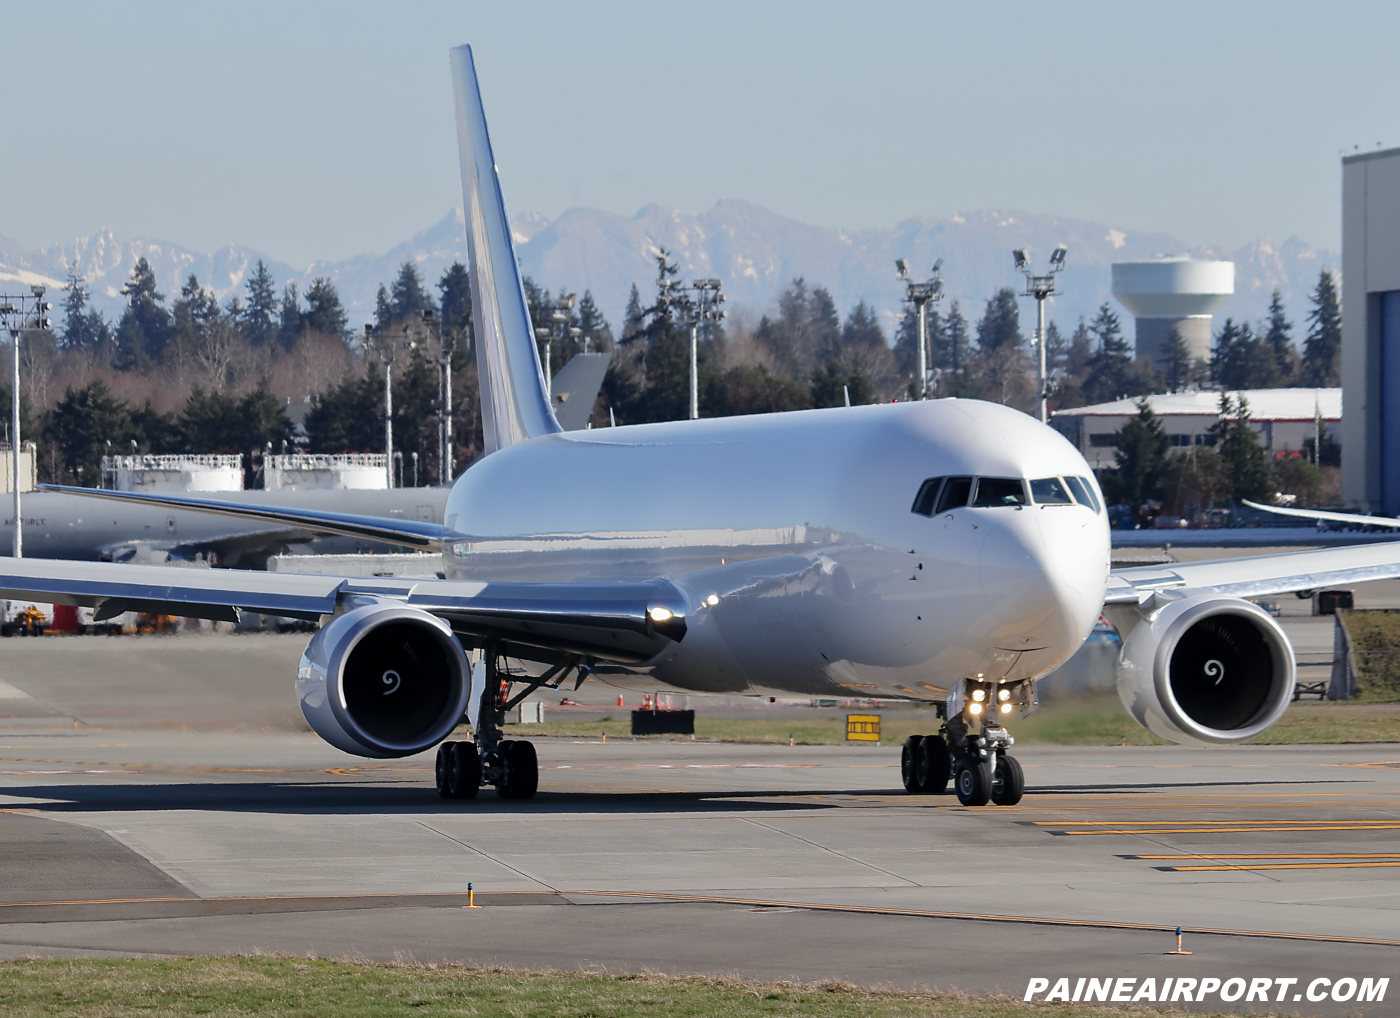 China Longhao Airlines 767 at KPAE Paine Field